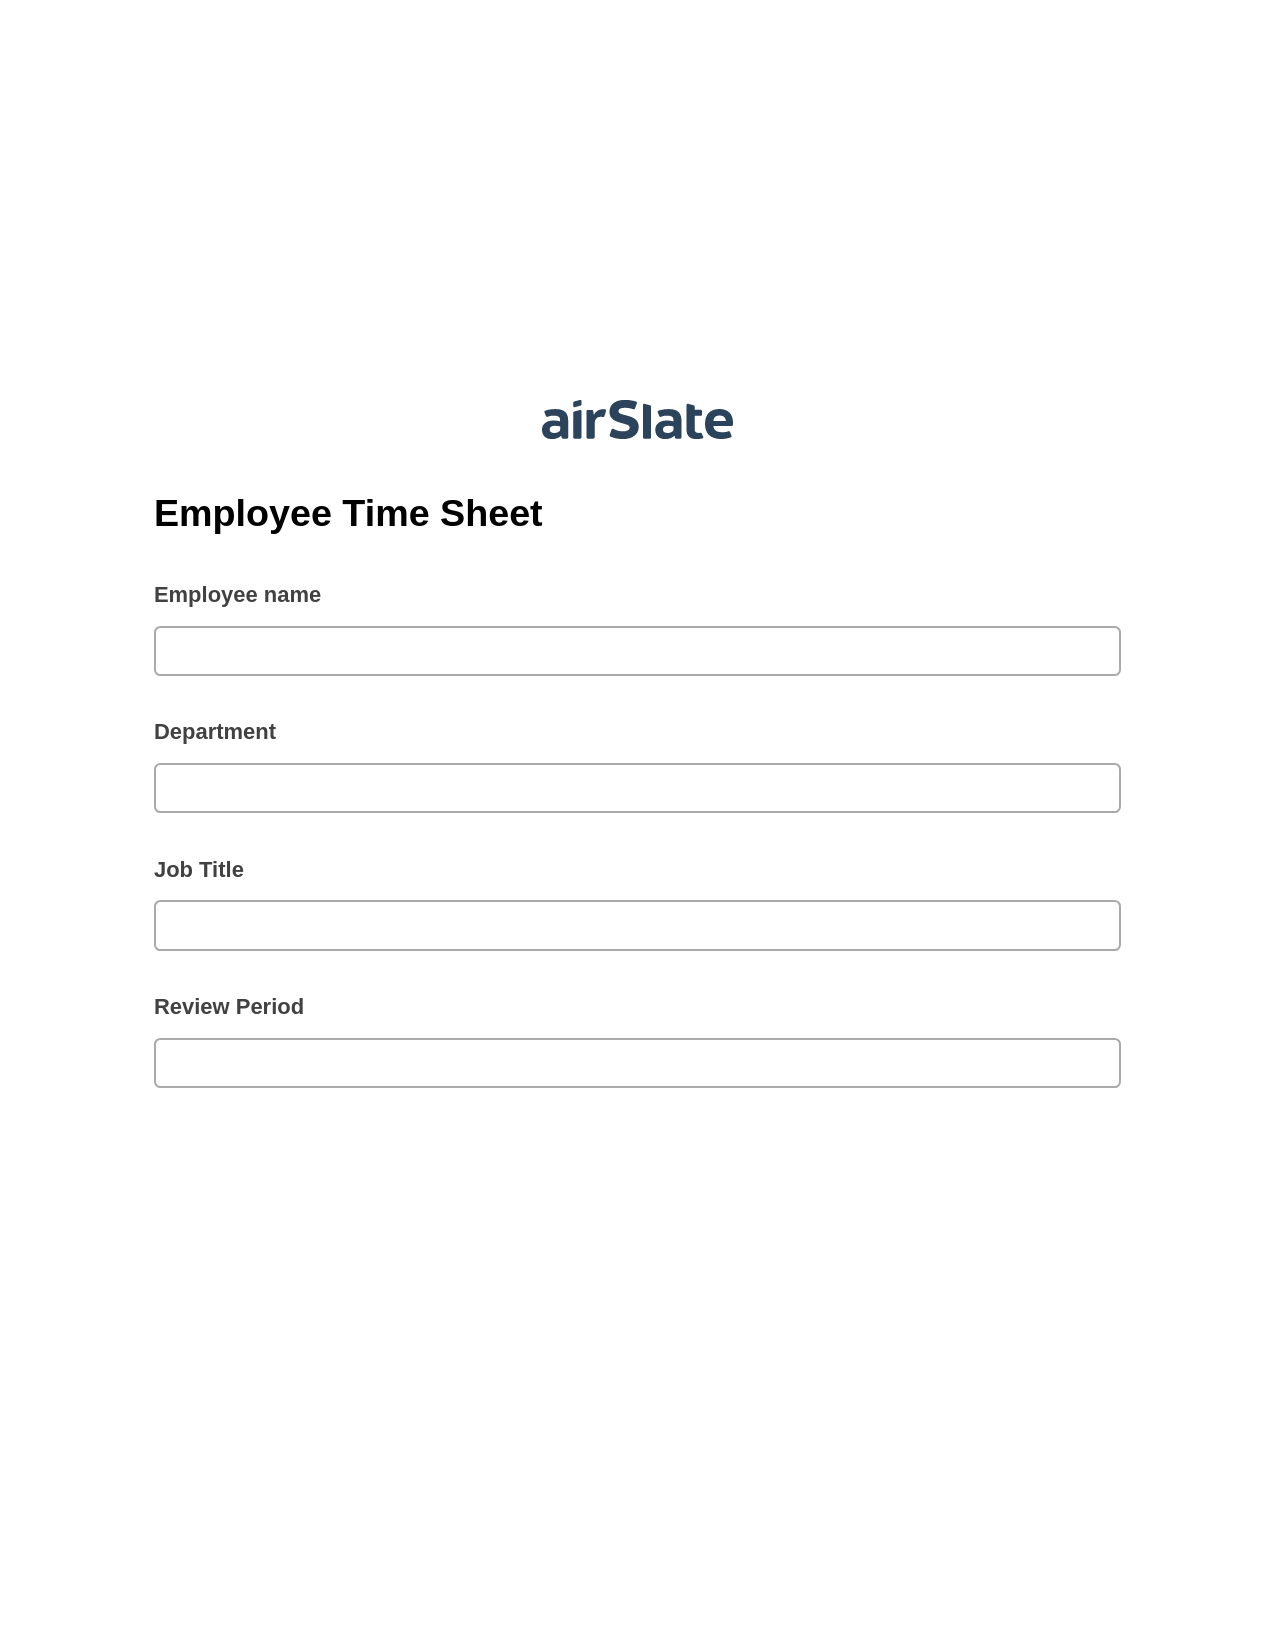 Multirole Employee Time Sheet Pre-fill from MS Dynamics 365 Records, Update Audit Trail Bot, Archive to SharePoint Folder Bot